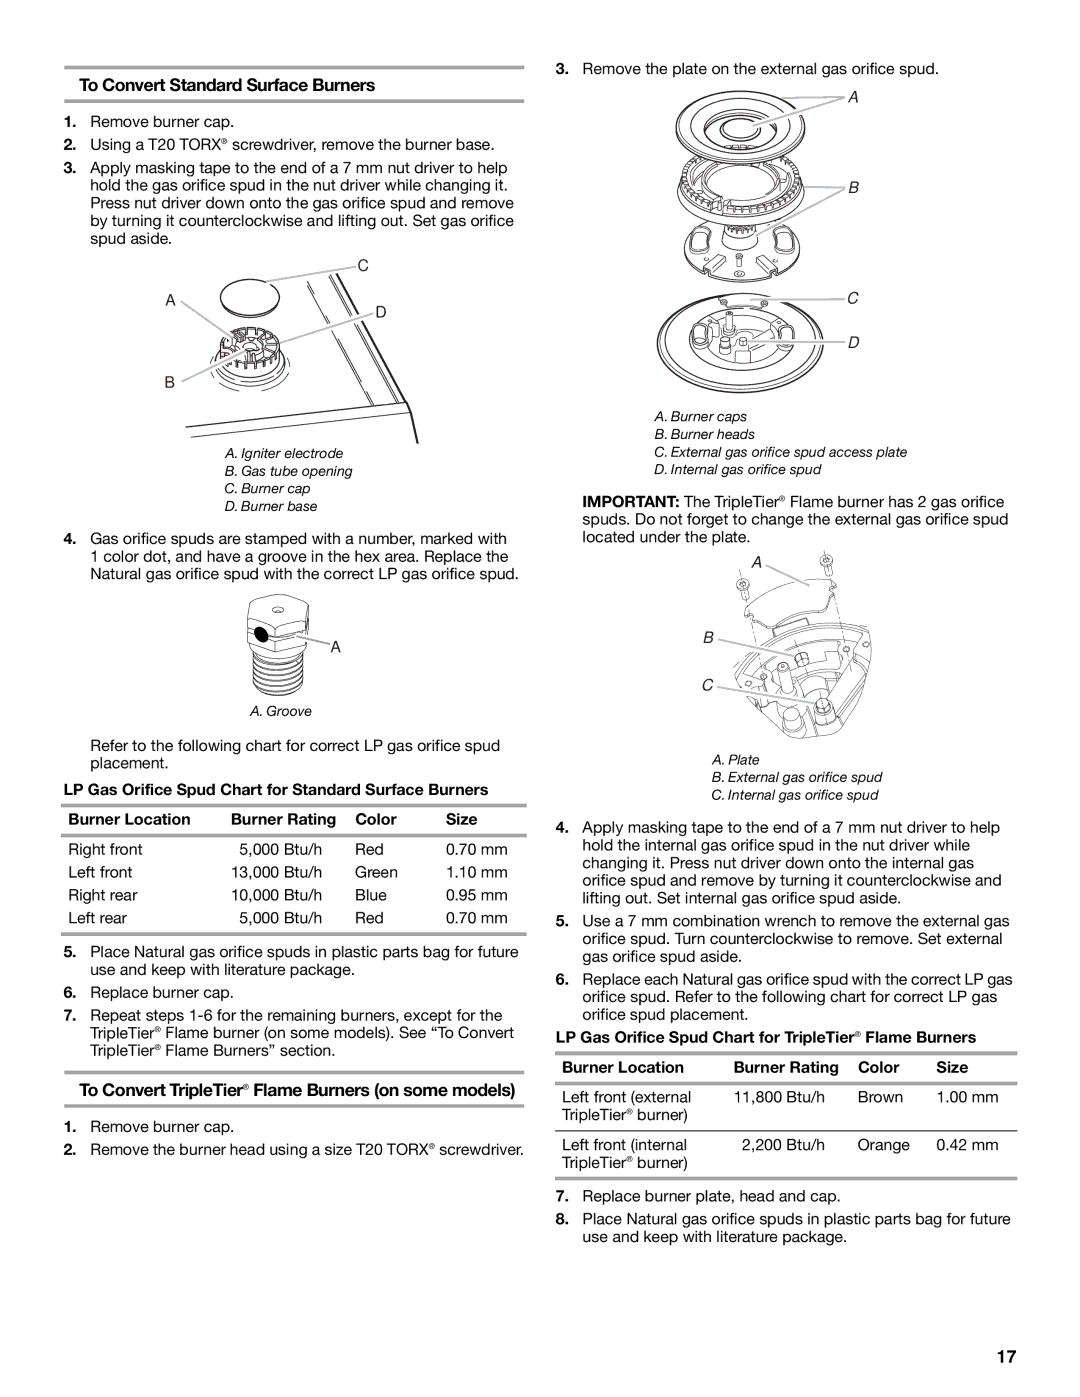 KitchenAid W10118262B To Convert Standard Surface Burners, To Convert TripleTier Flame Burners on some models, Groove 